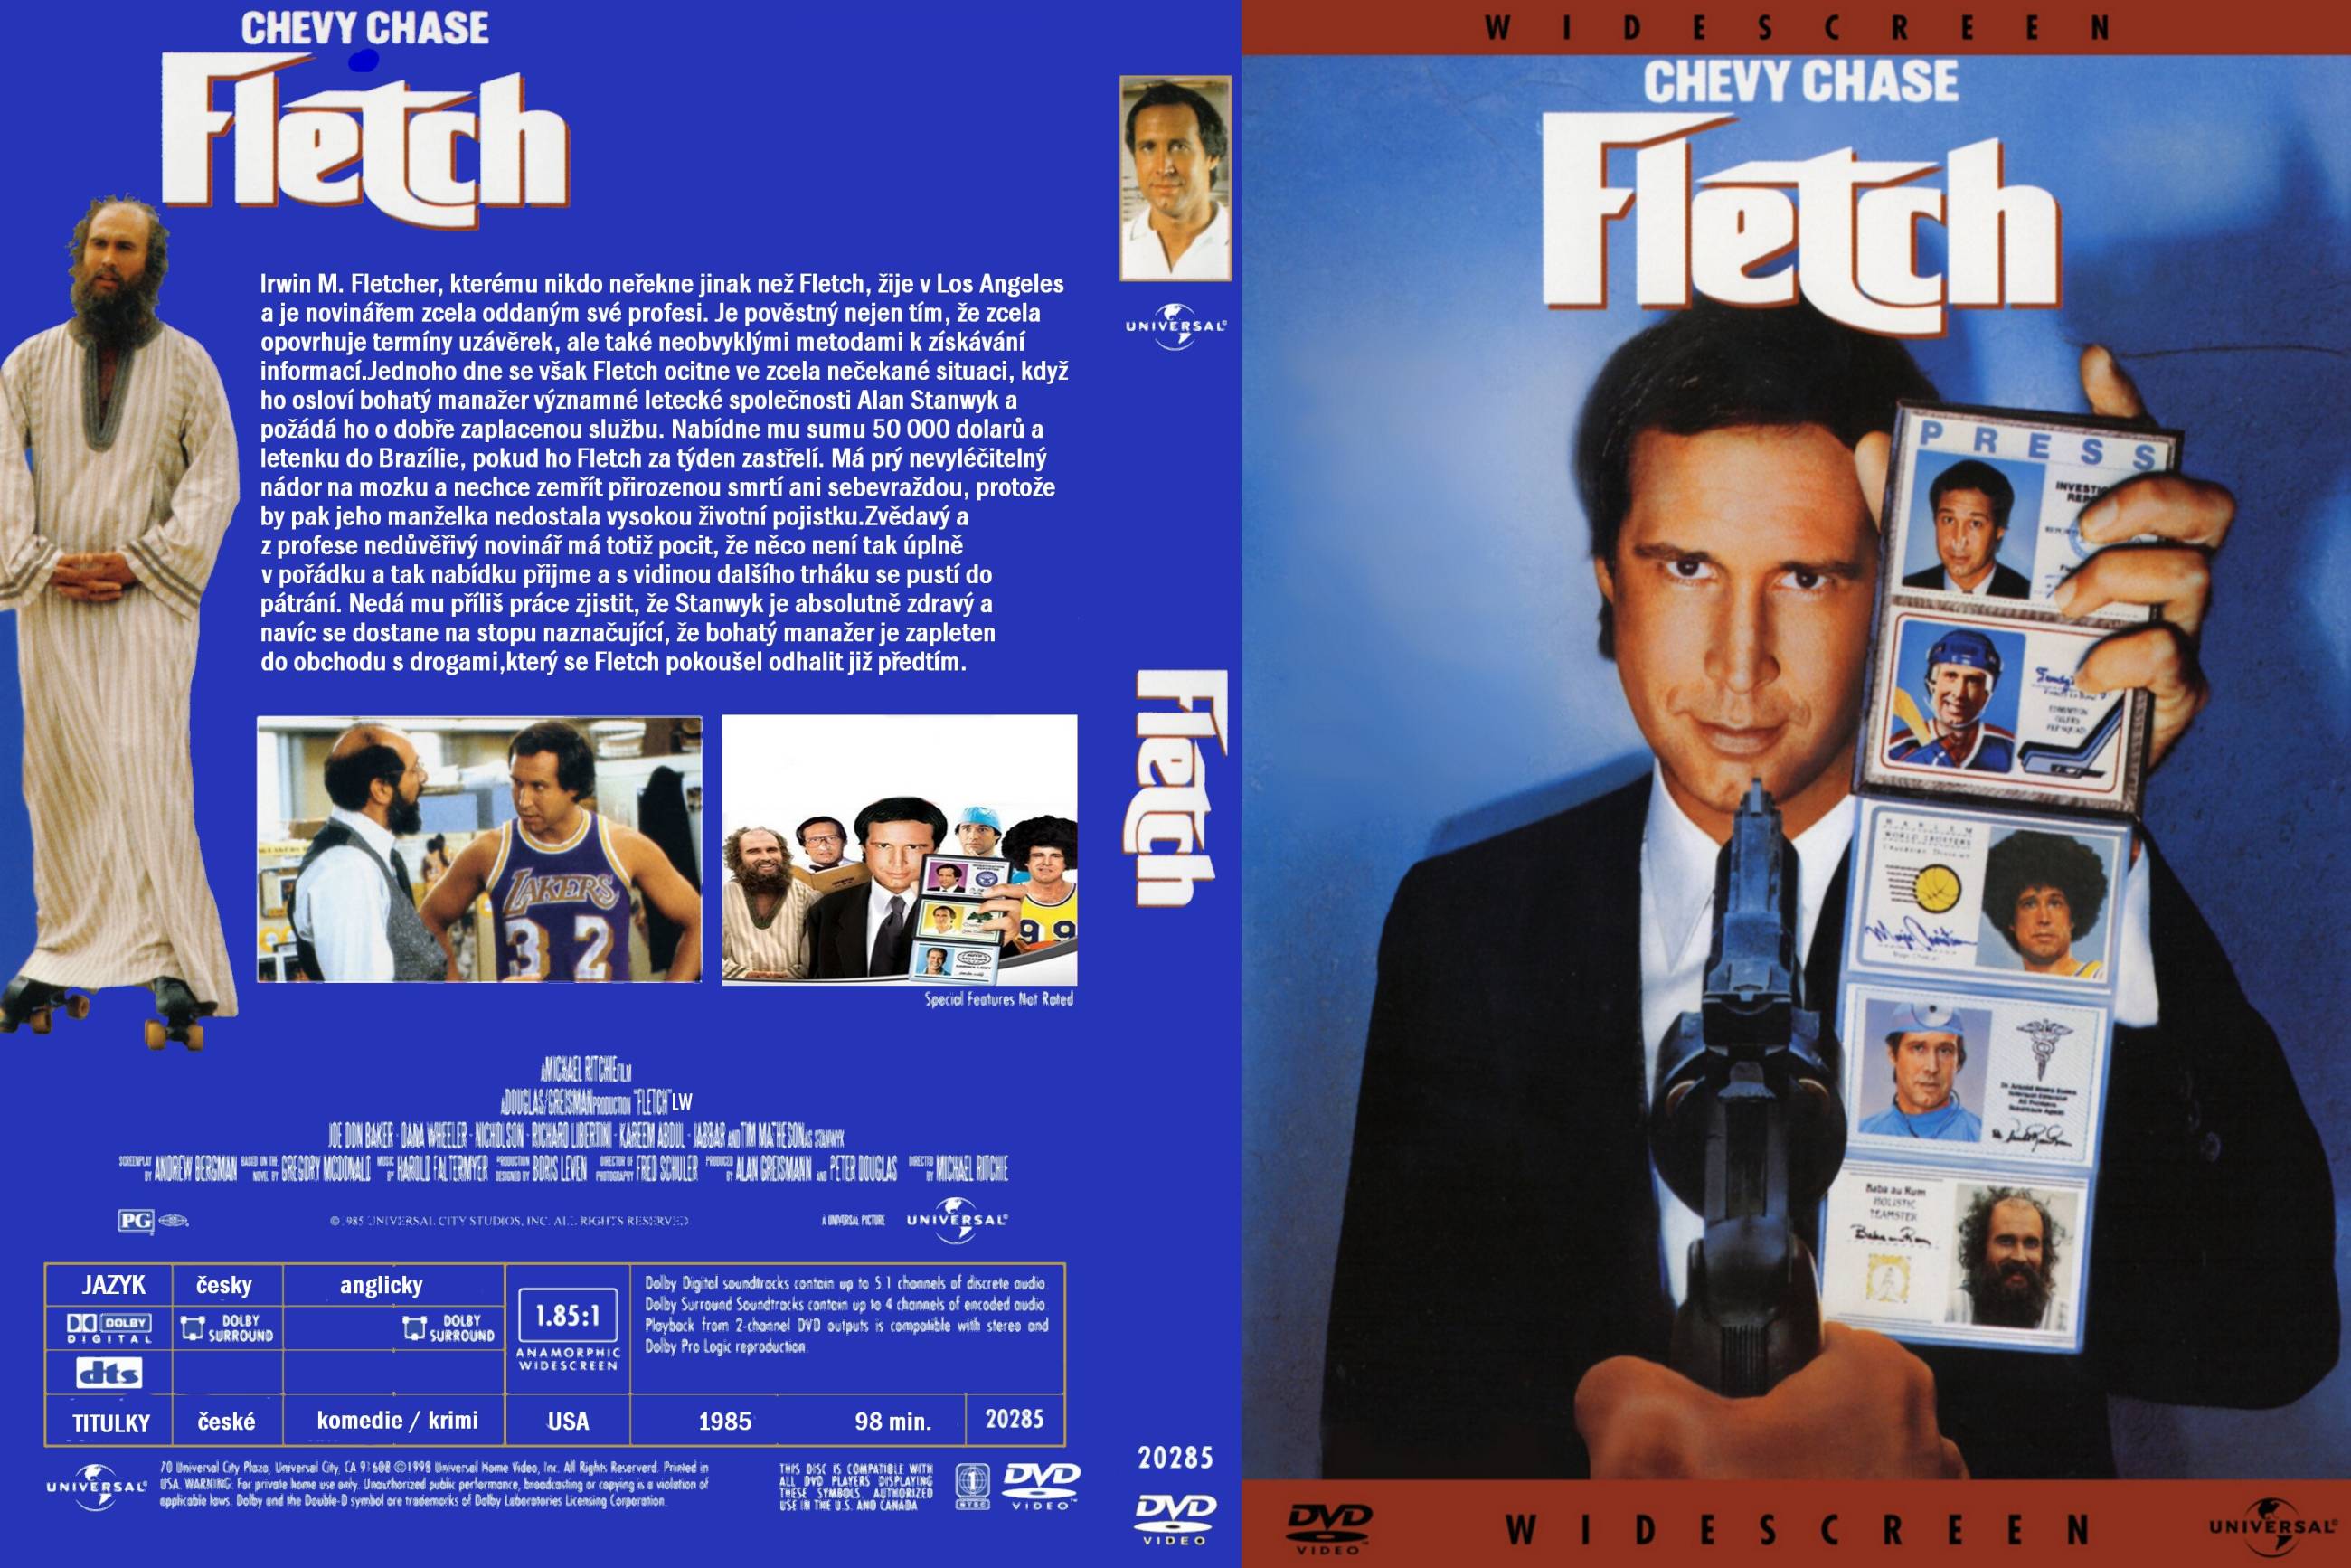 03 Fletch (1985) Collectie Chevy Chase